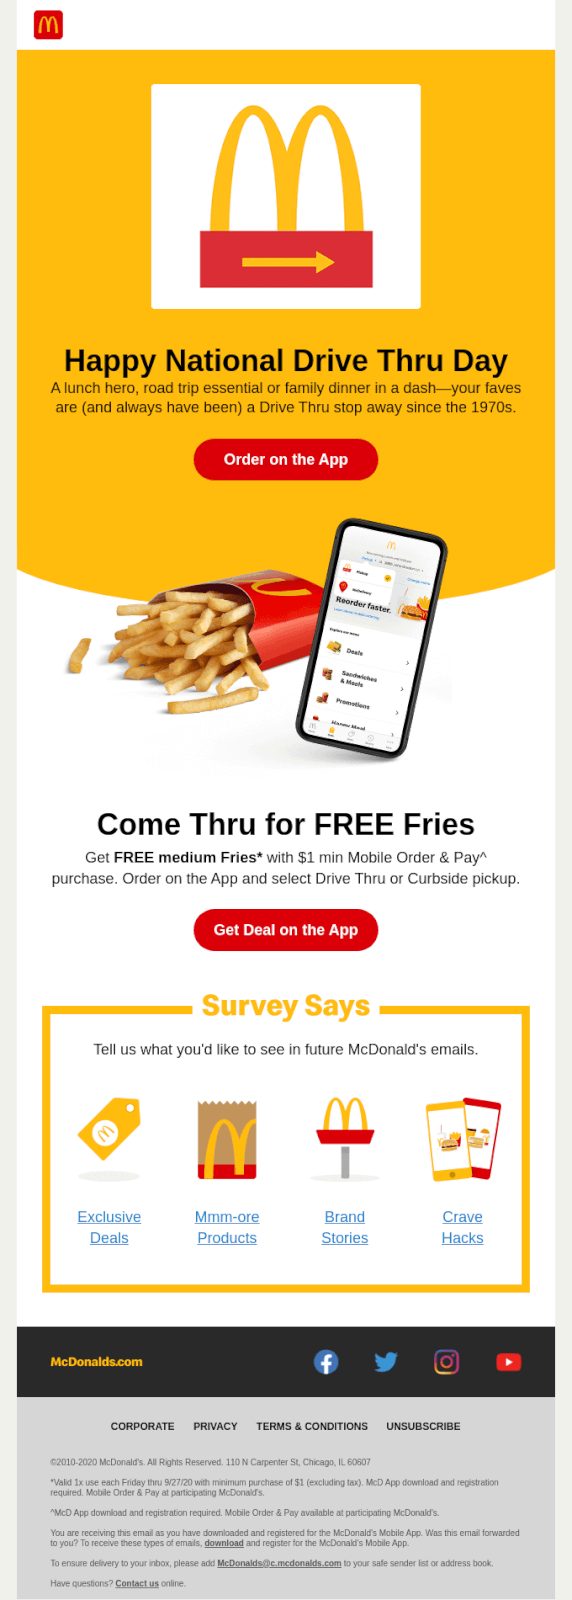 An example of a personalized email campaign from McDonald’s